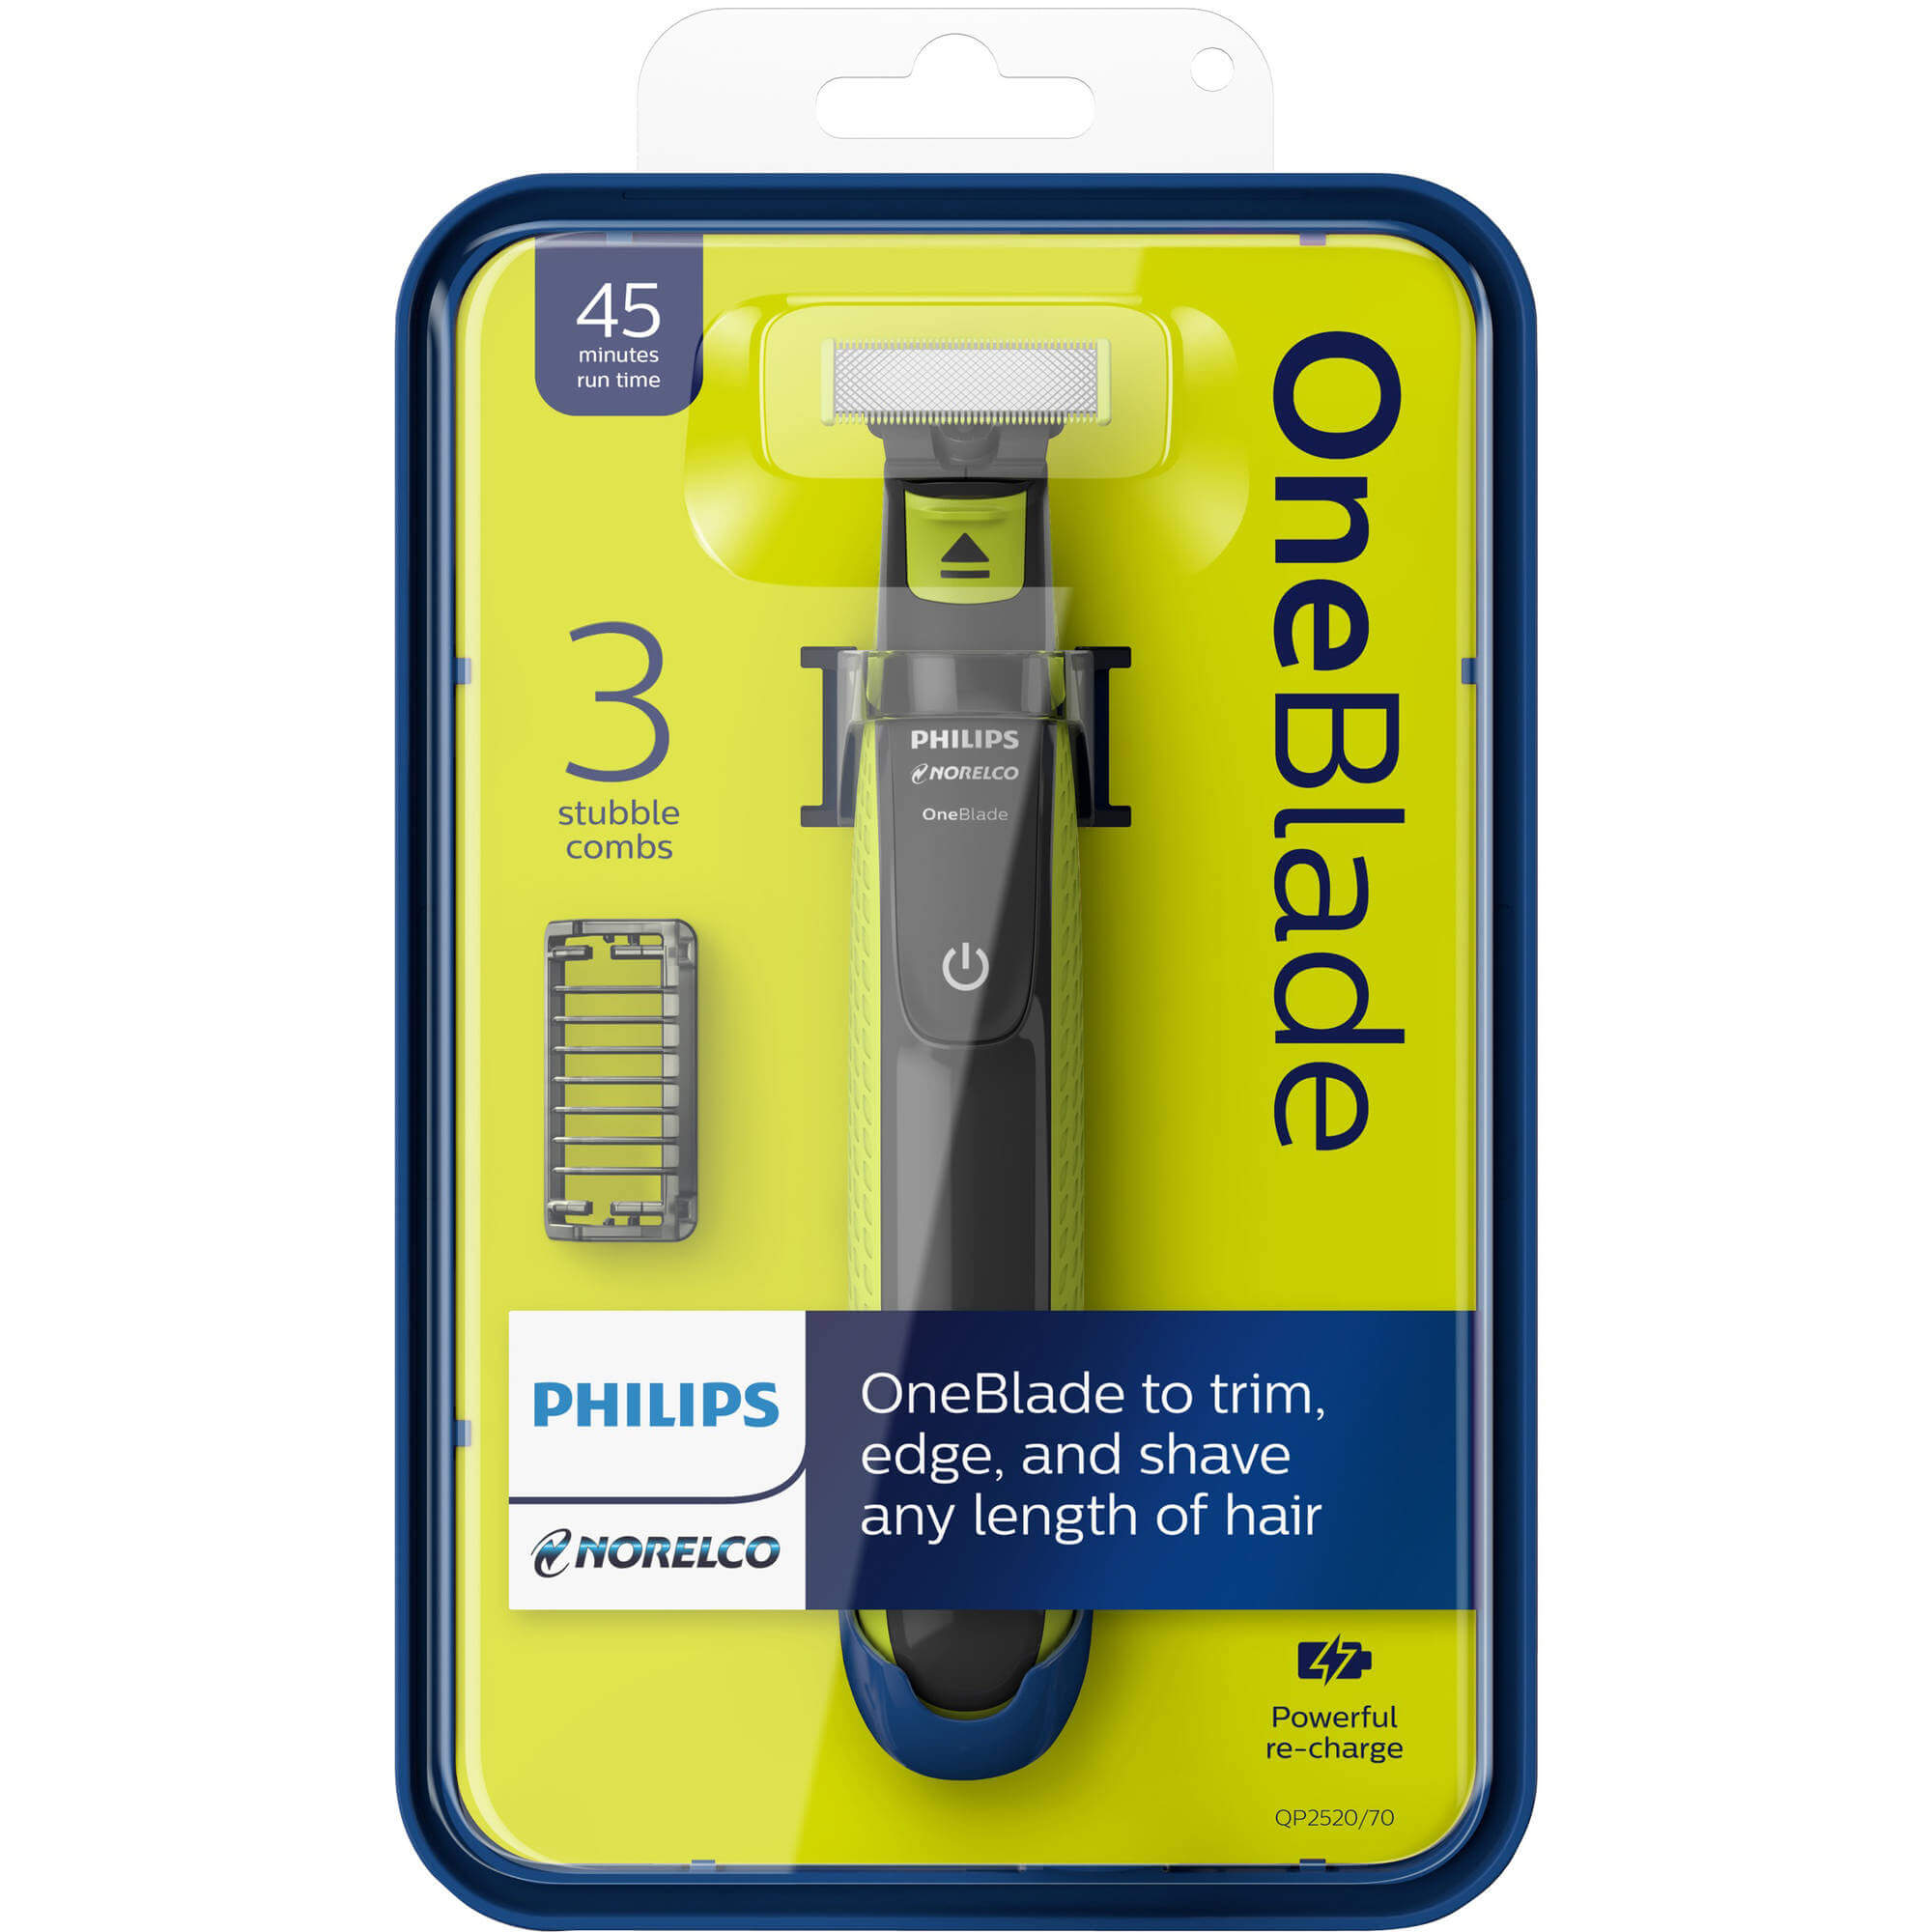 What's the difference between the different Philips OneBlade